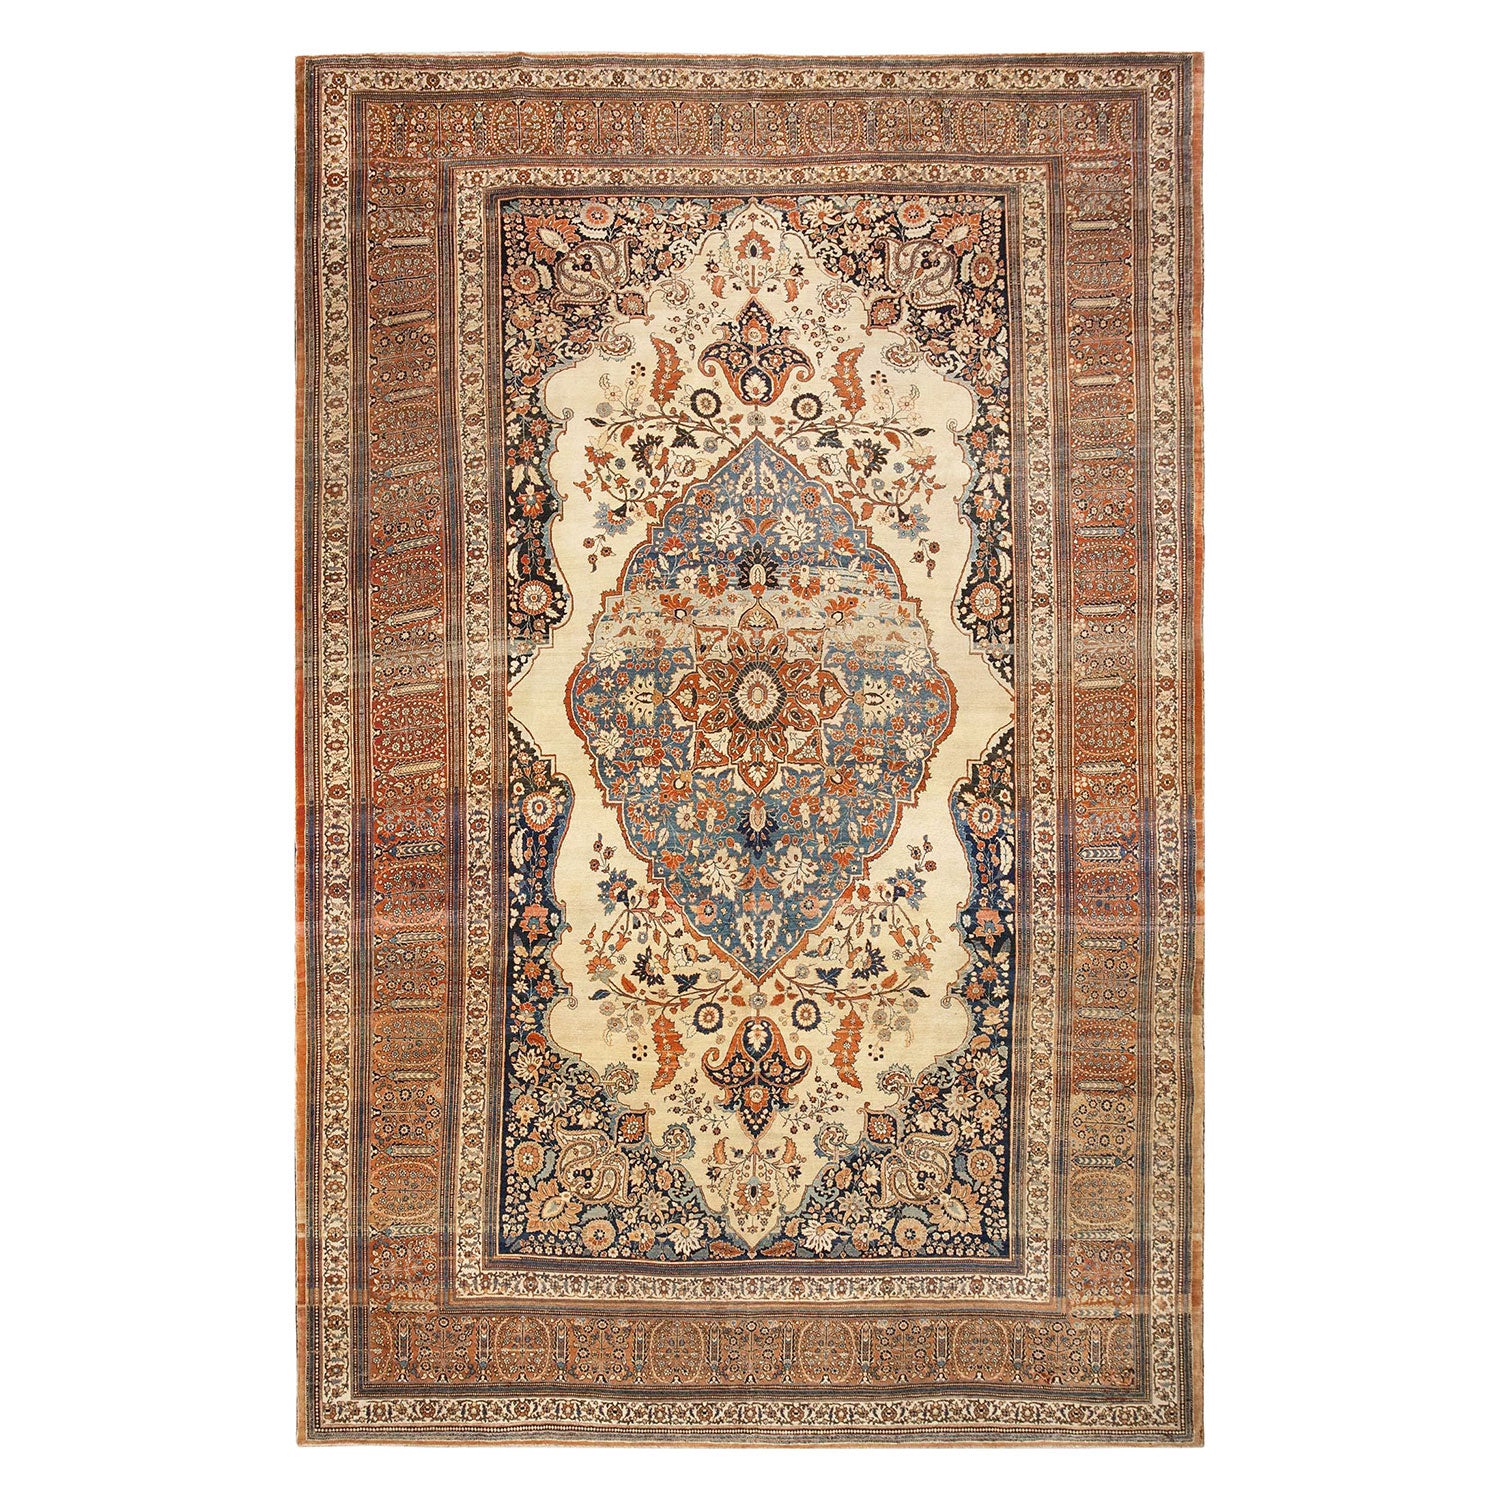 Exquisite hand-knotted oriental rug showcasing intricate patterns and vibrant colors.